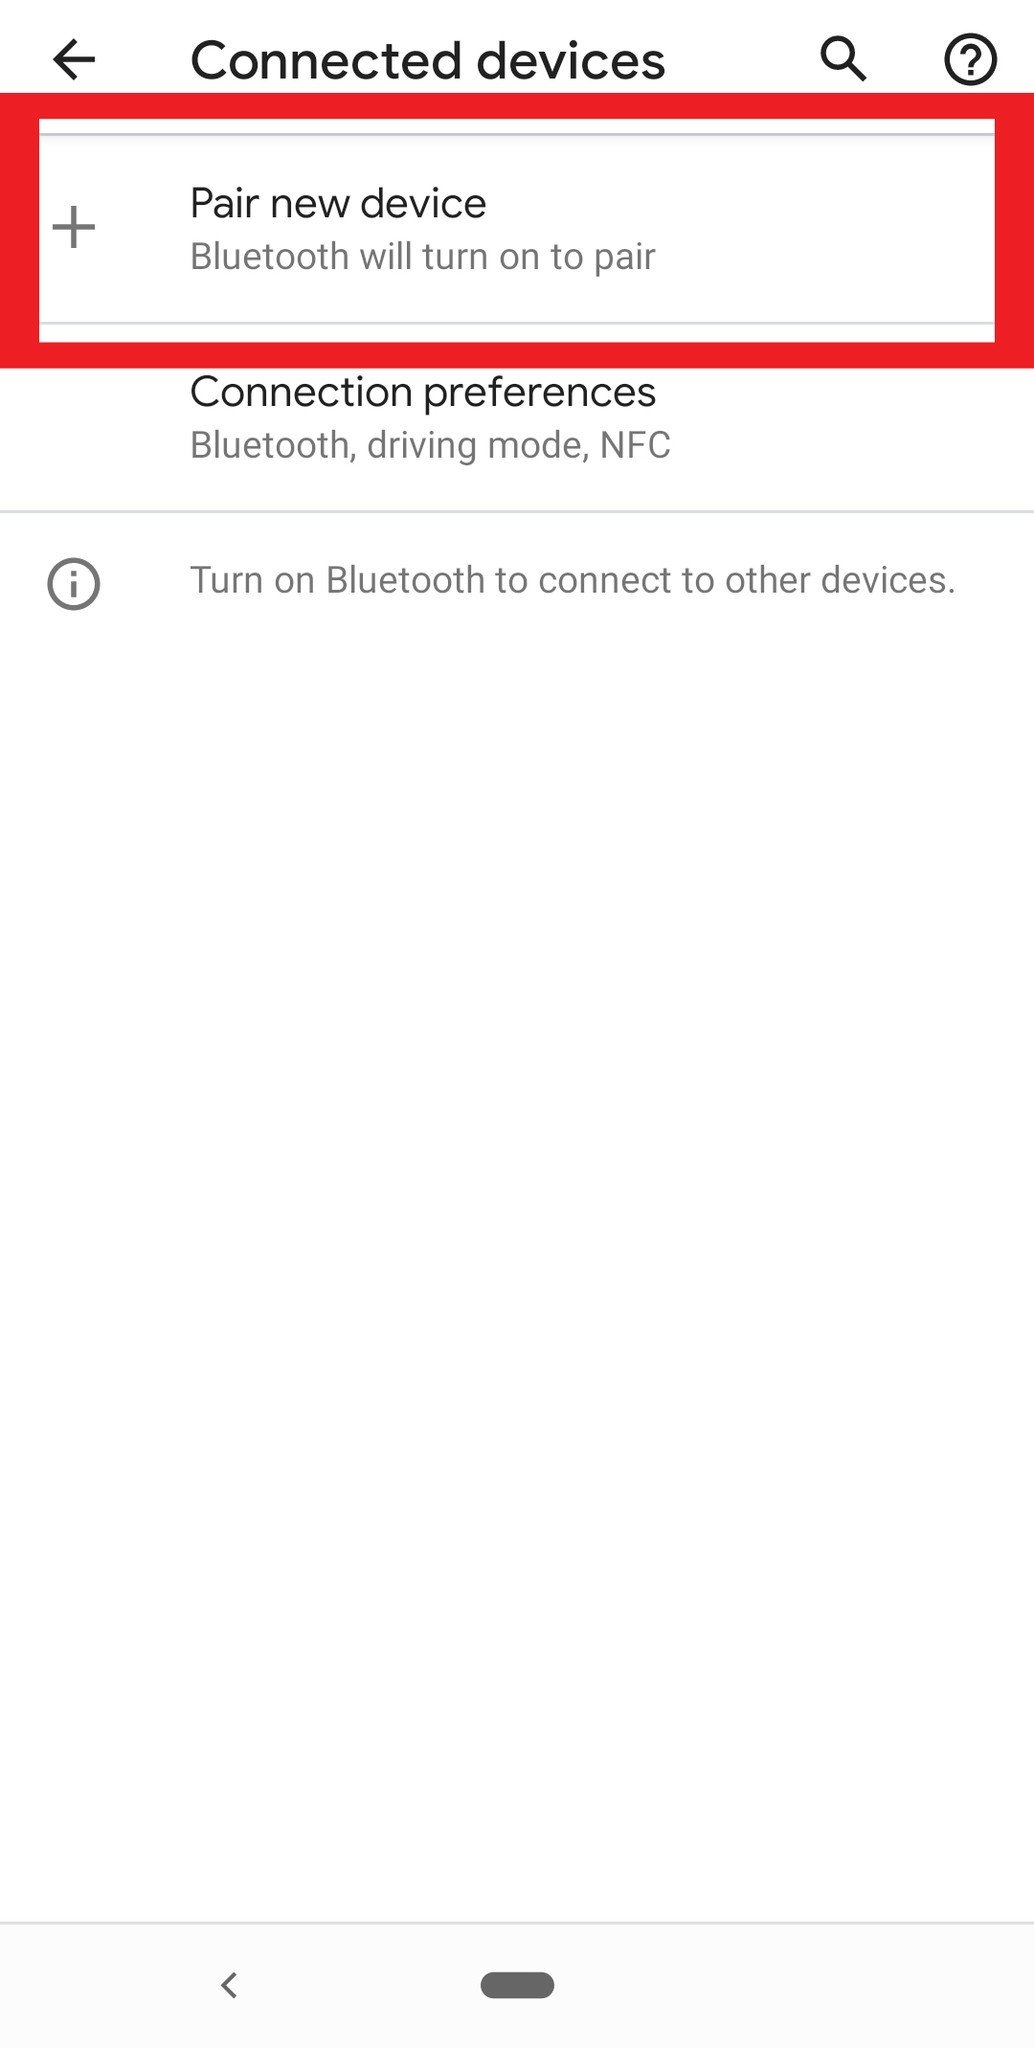 Selecint Pair new device on Pixel 3a